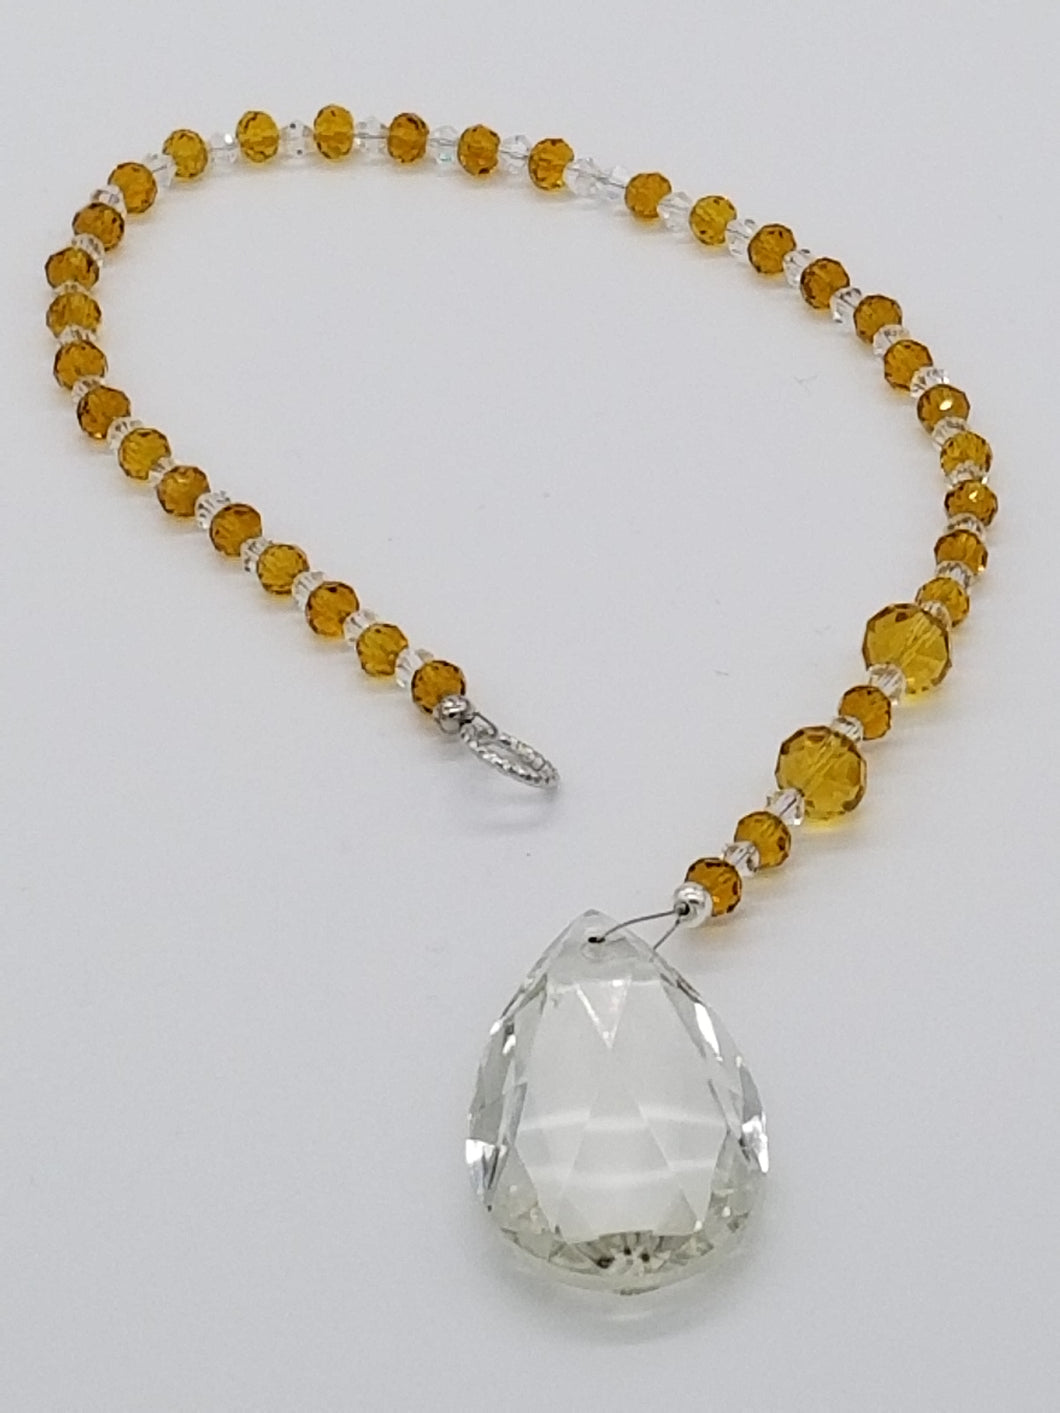 Amber and Crystal Beads and Elongated Tear Drop Suncatcher